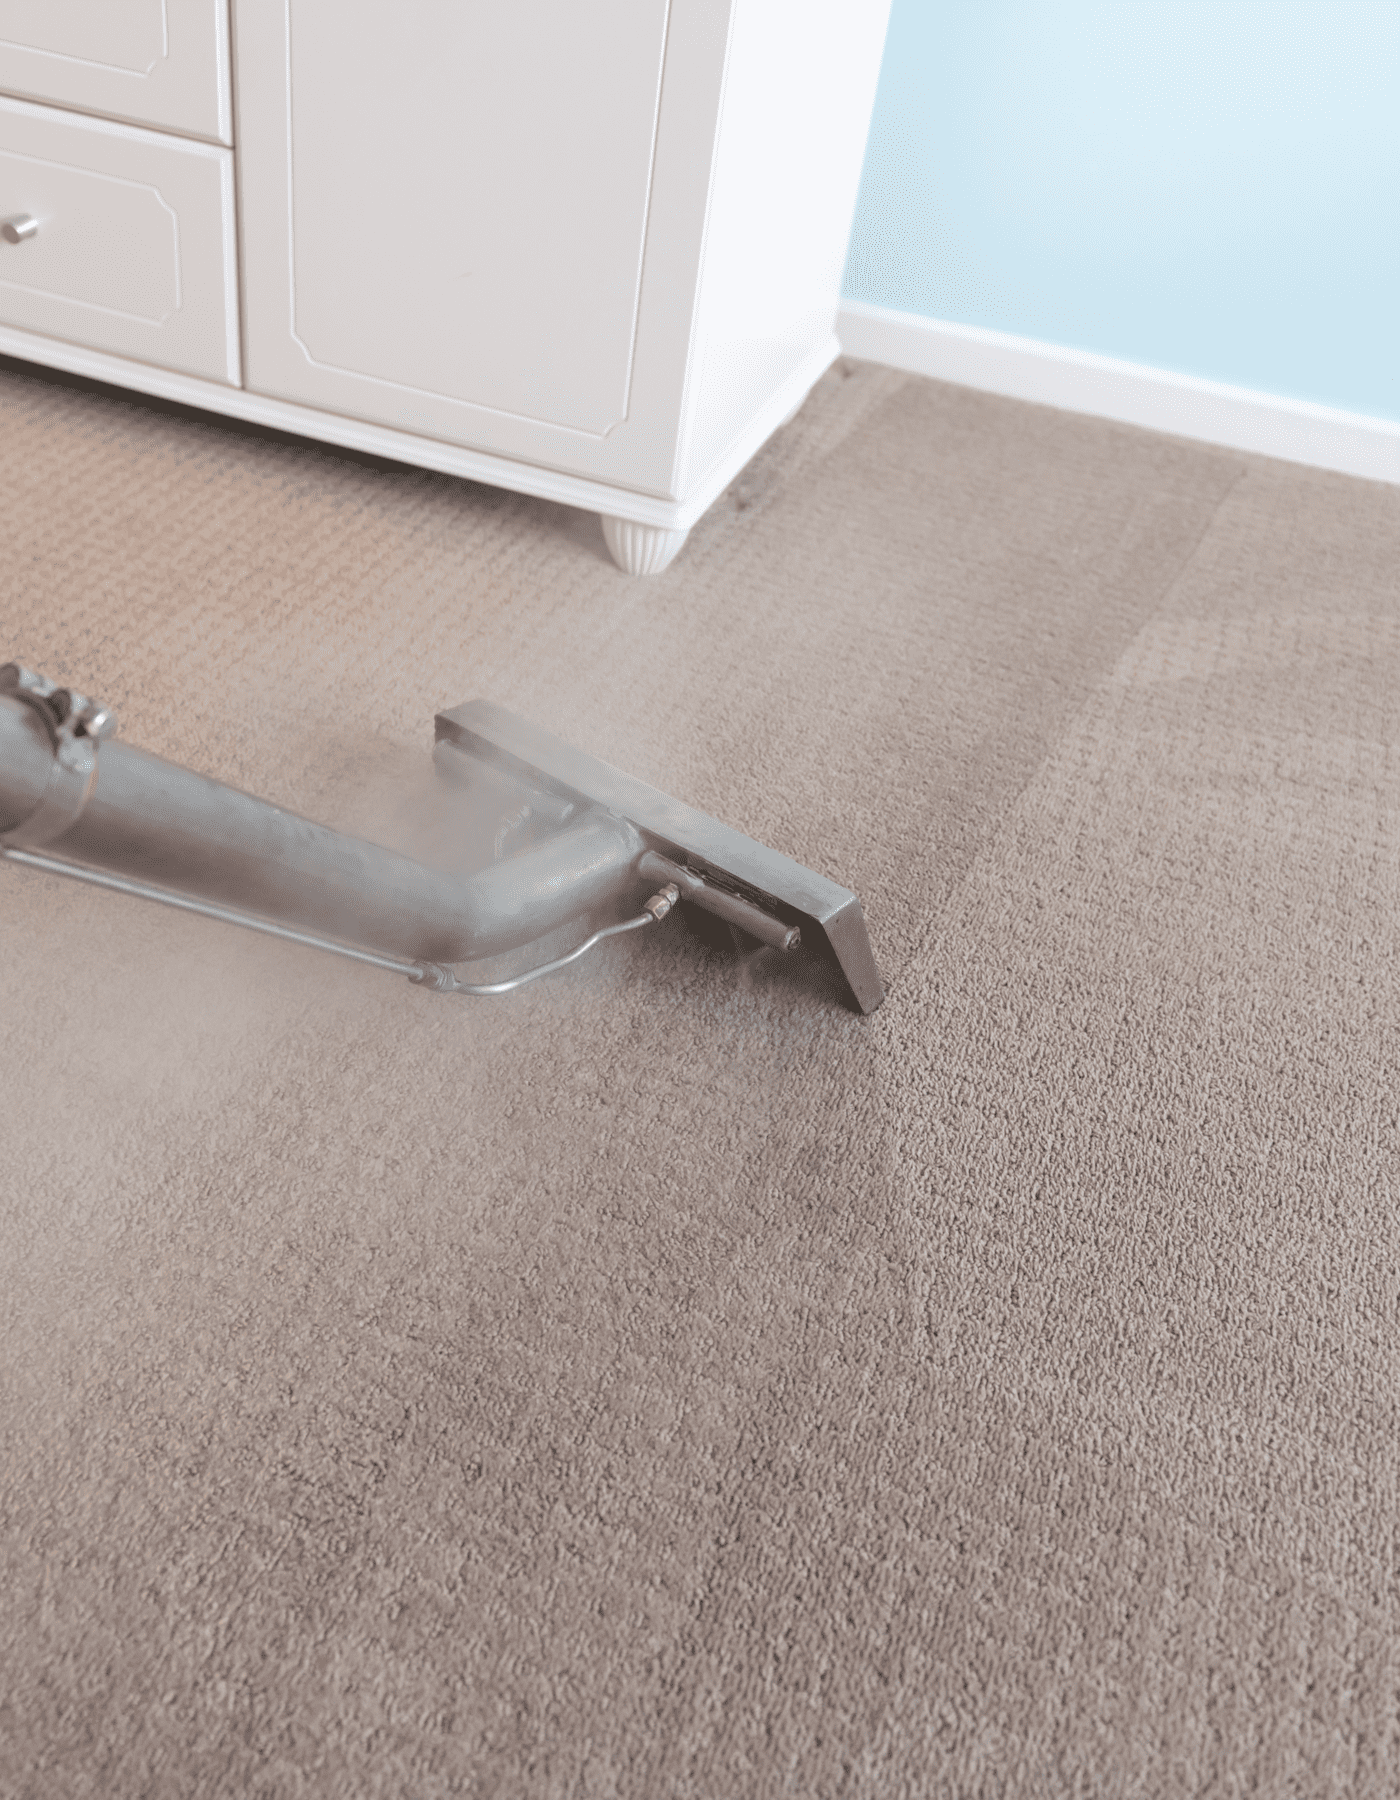 Home Water Damage Cleanup